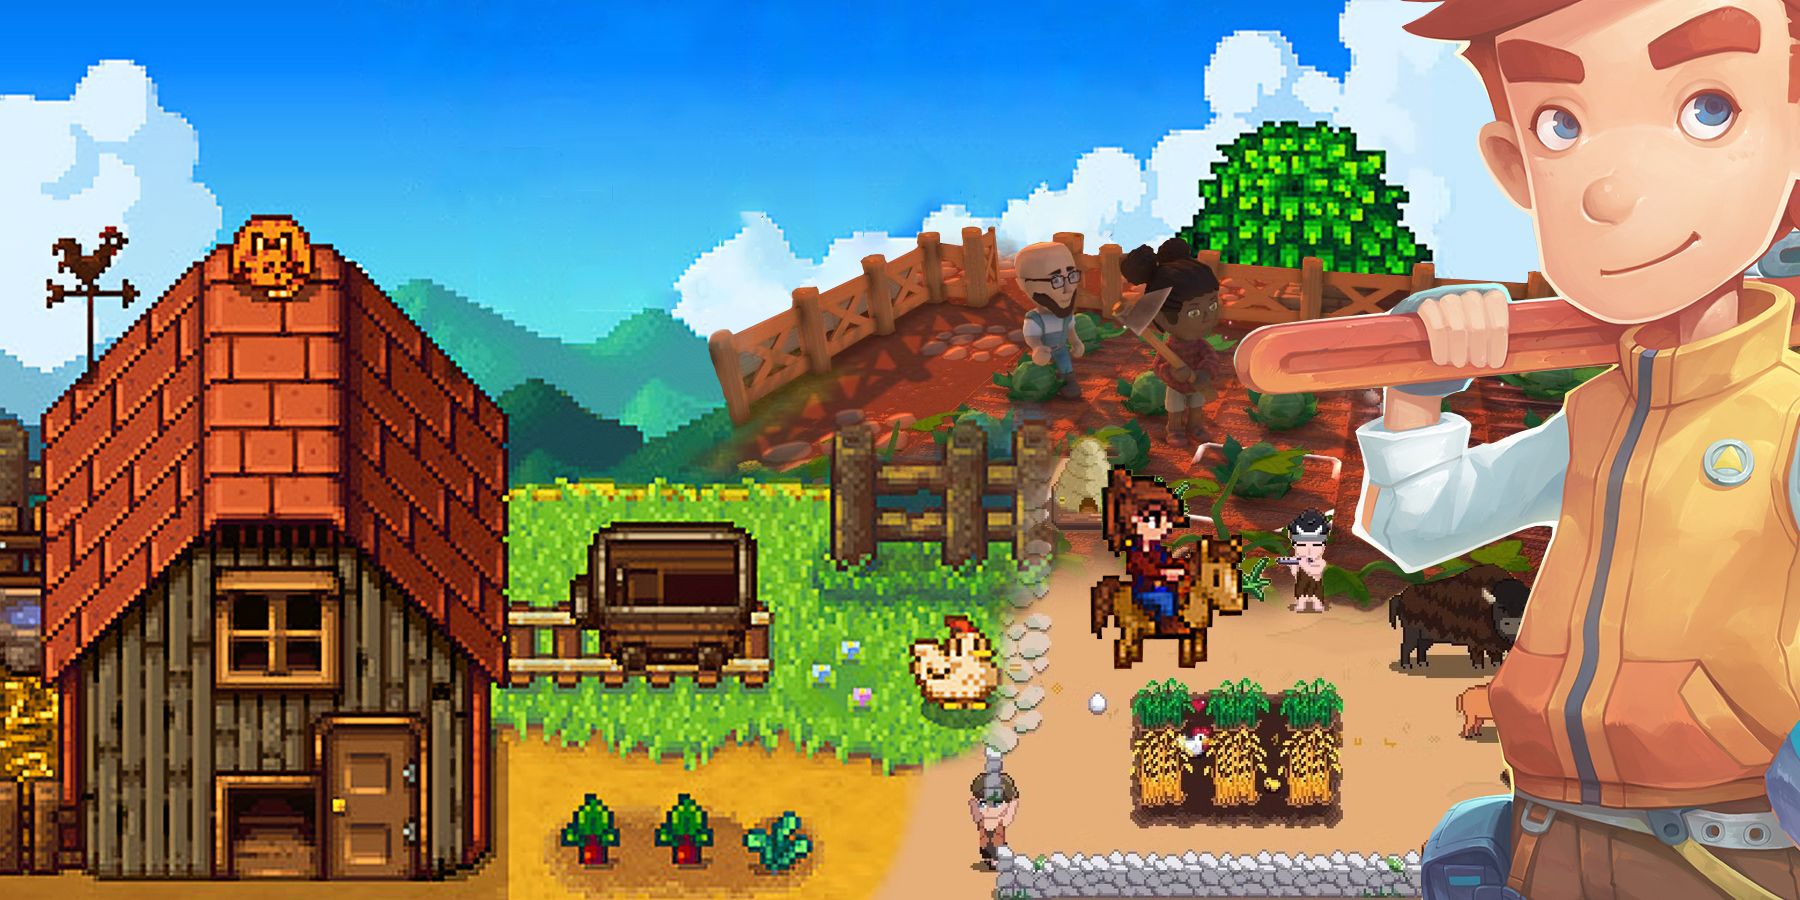 New Stardew Valley-Like Game Coming to PS5 and Xbox Series X Soon